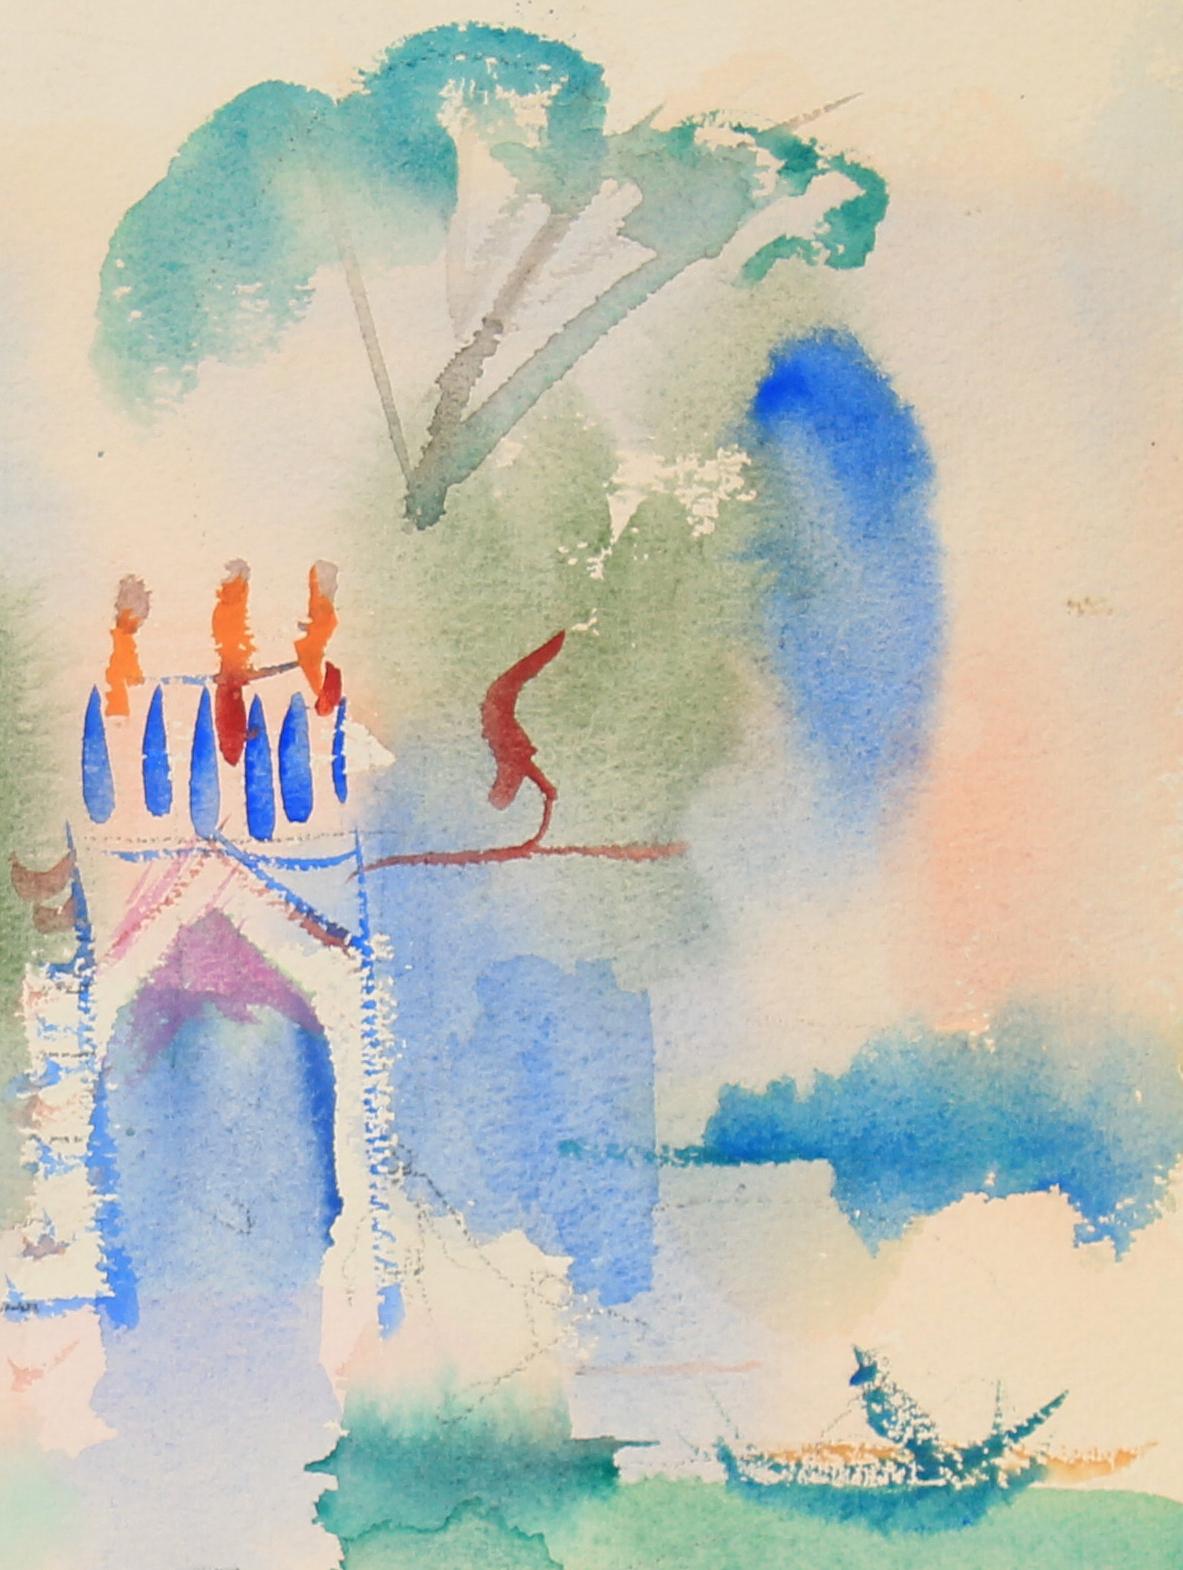 Abstracted Colorful Landscape in Watercolor with Swimmers, Mid 20th Century - Art by David Landis